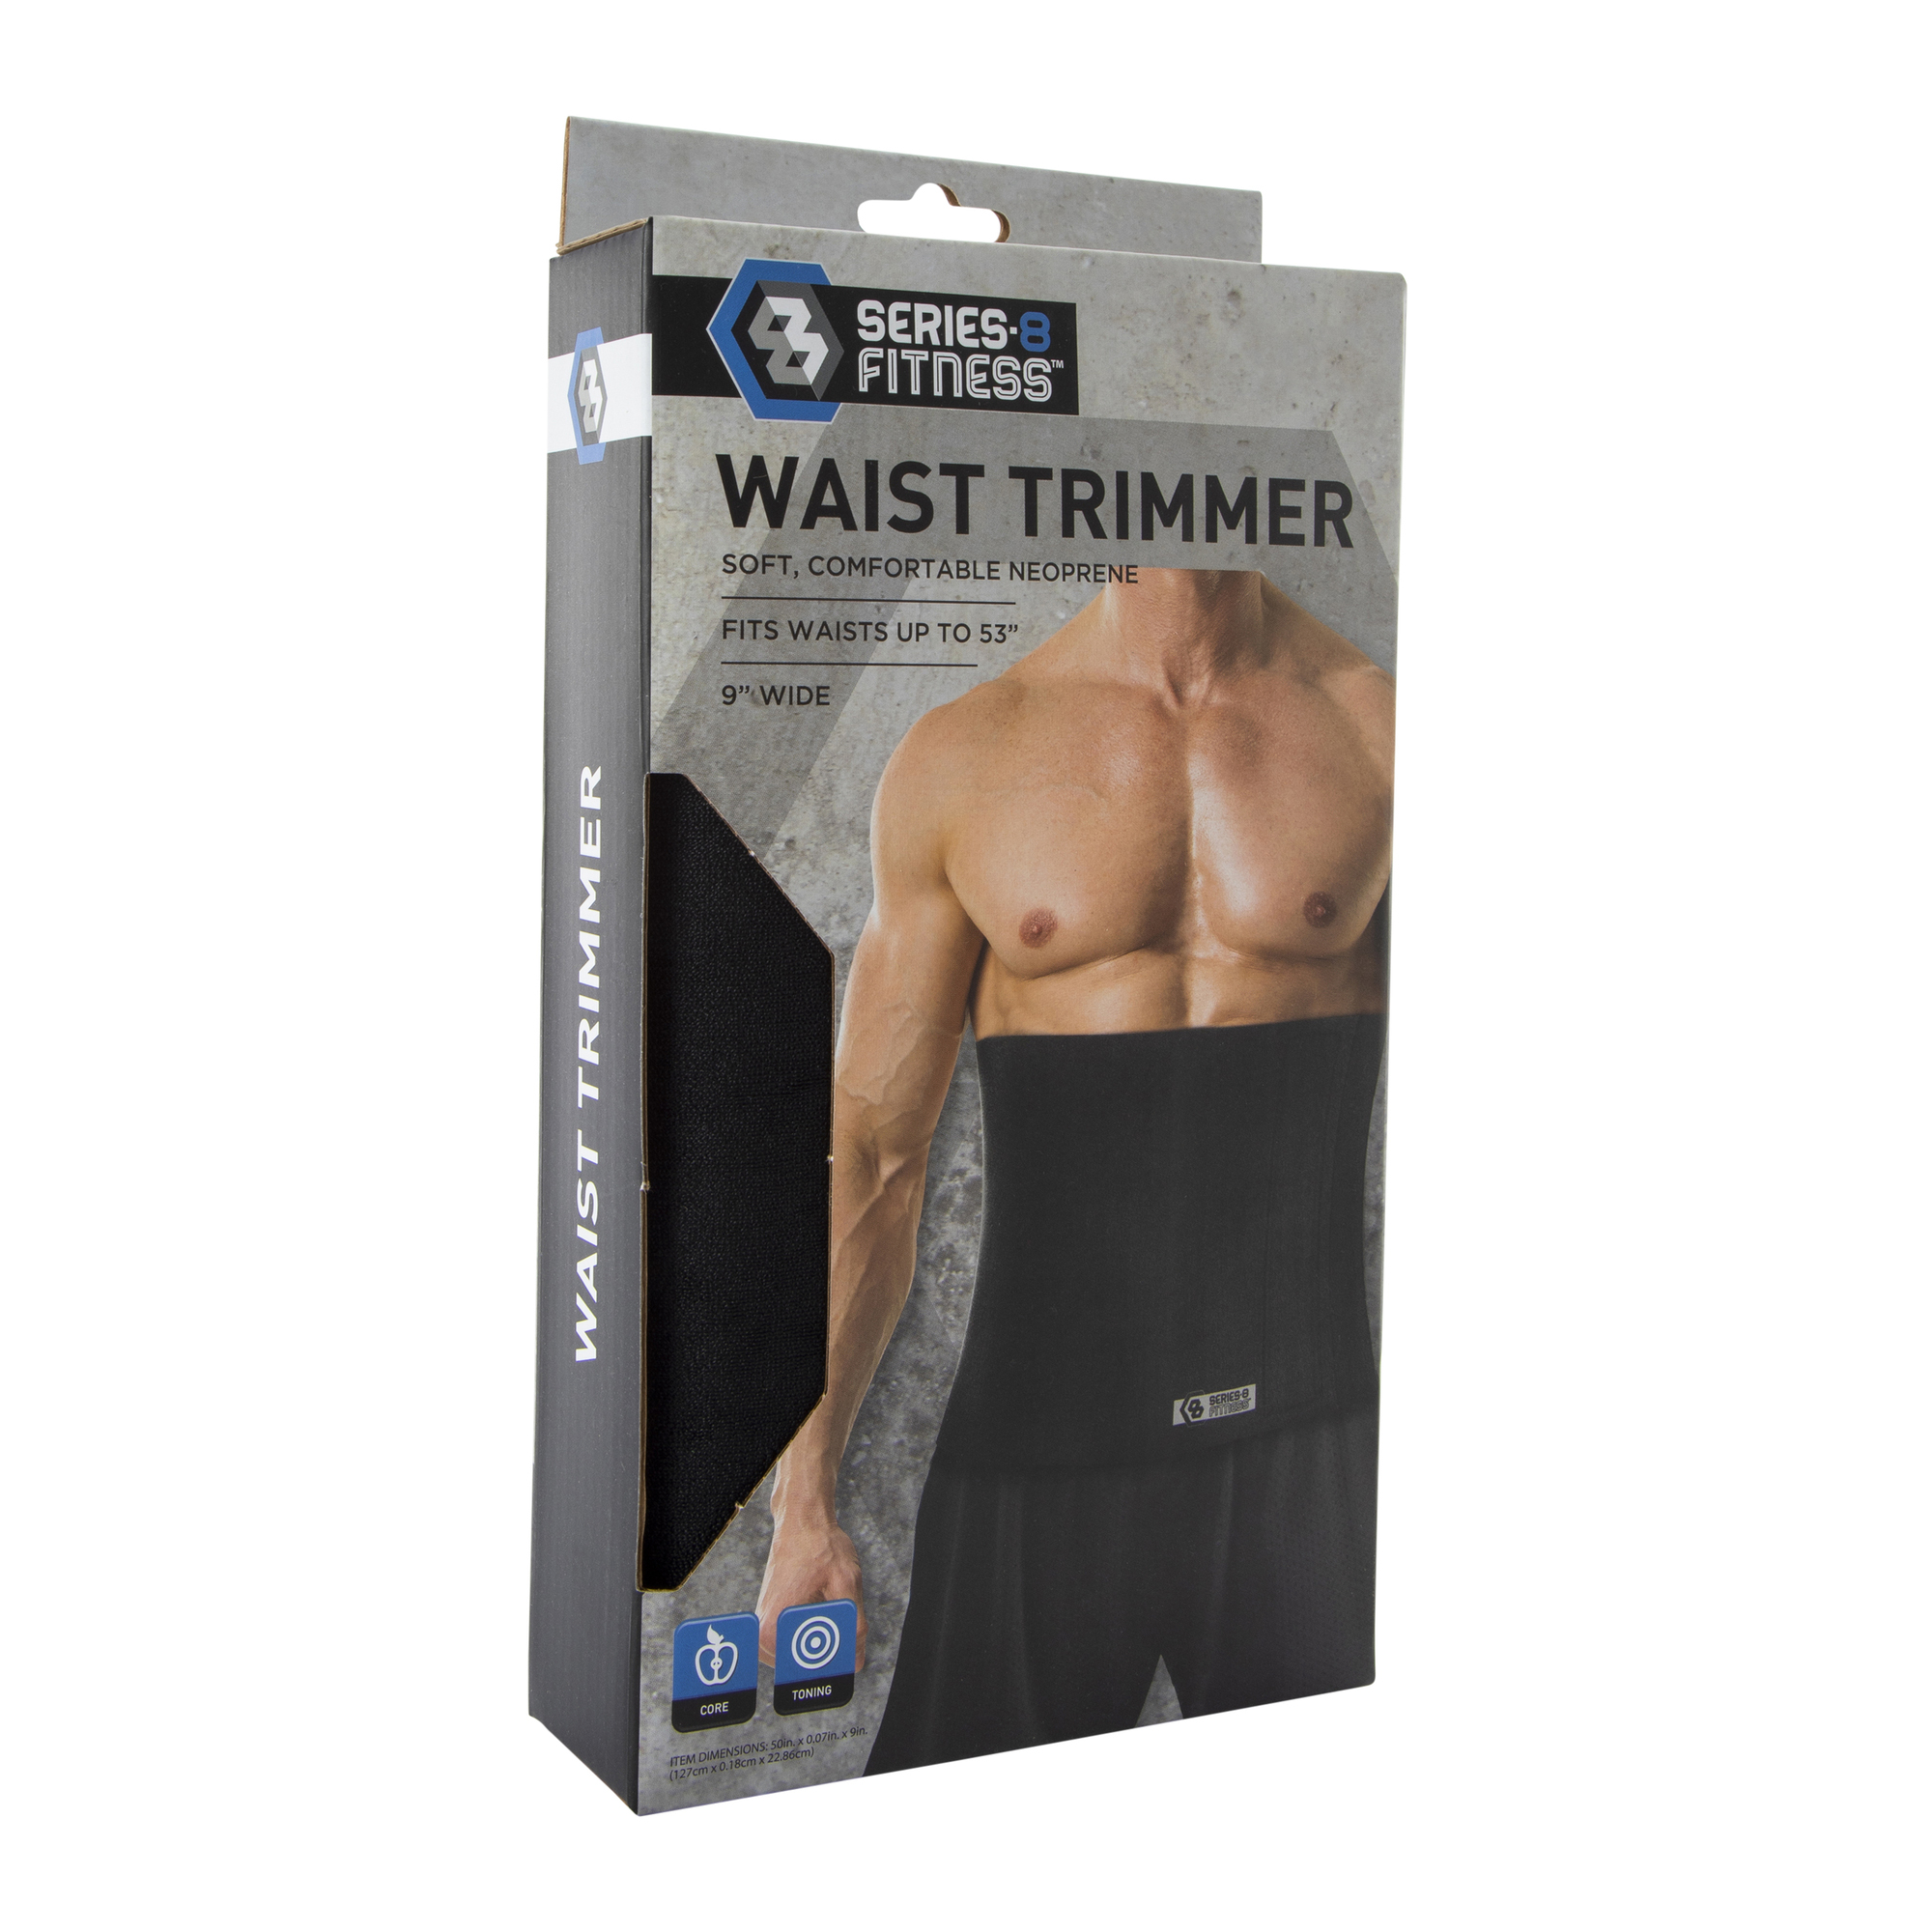 Find Cheap, Fashionable and Slimming 4 step shape waist trimmer